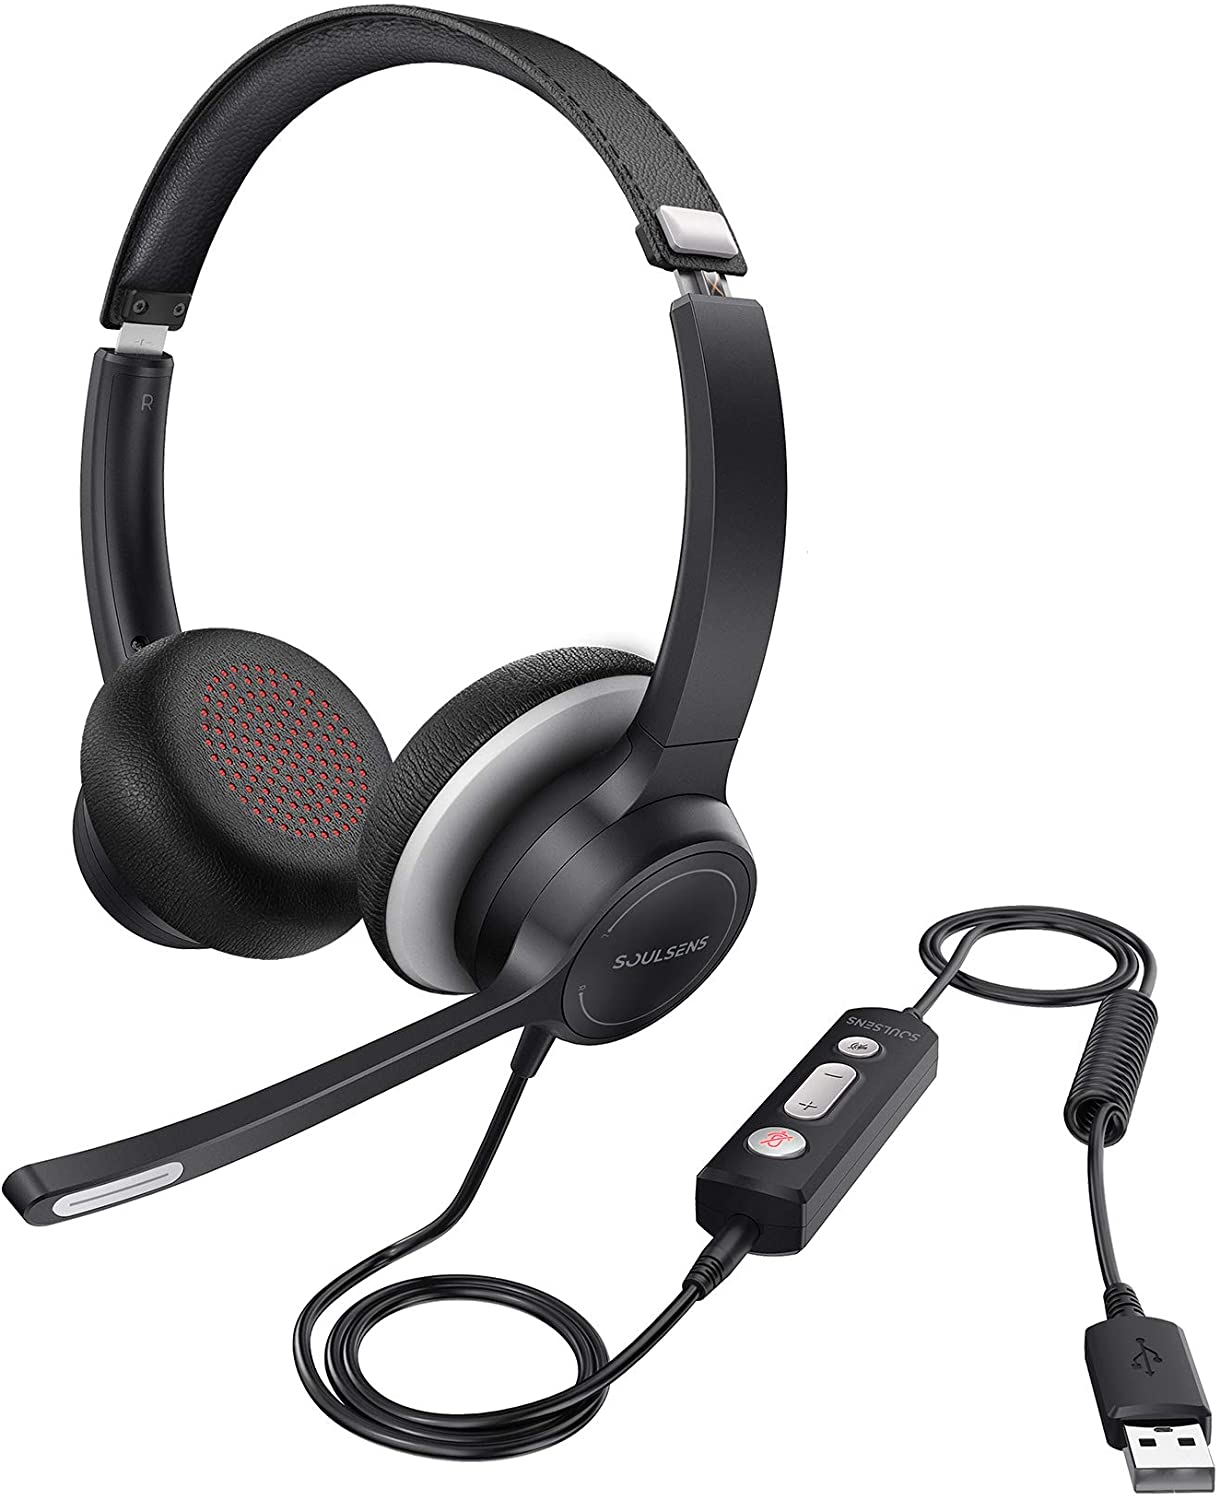 Soulsens USB Headset with Microphone Noise-Cancelling - e4cents